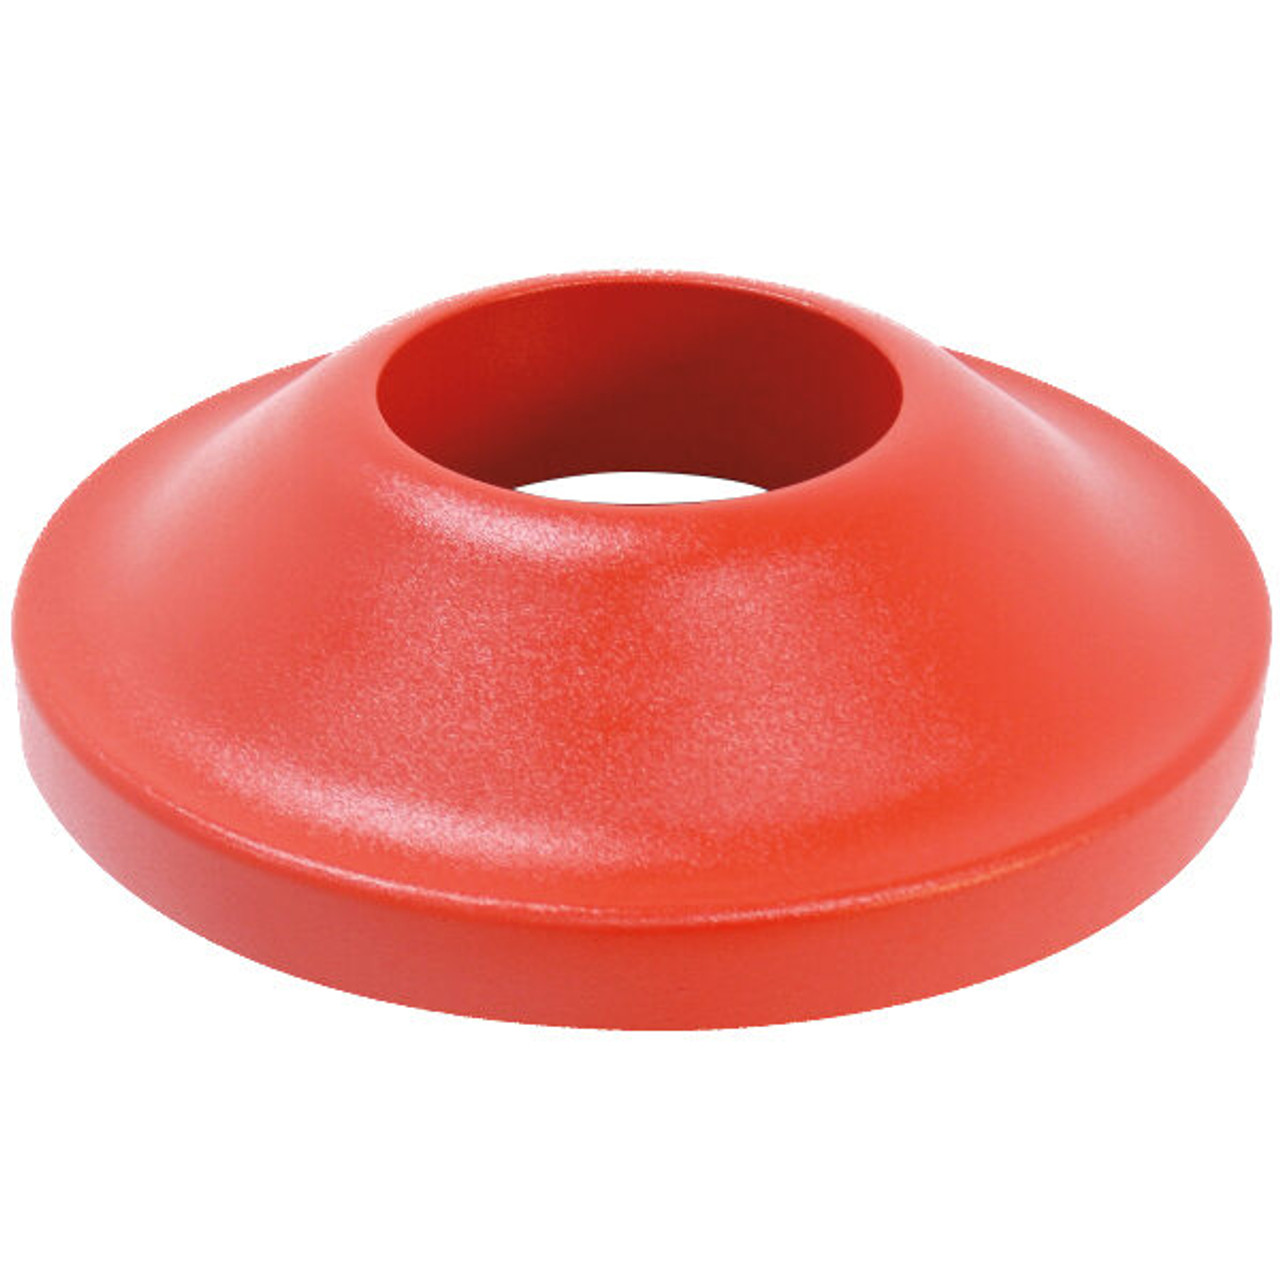 24.75 Inch Plastic Pitch In Lid TF1474 for TF Round Trash Cans (Red)